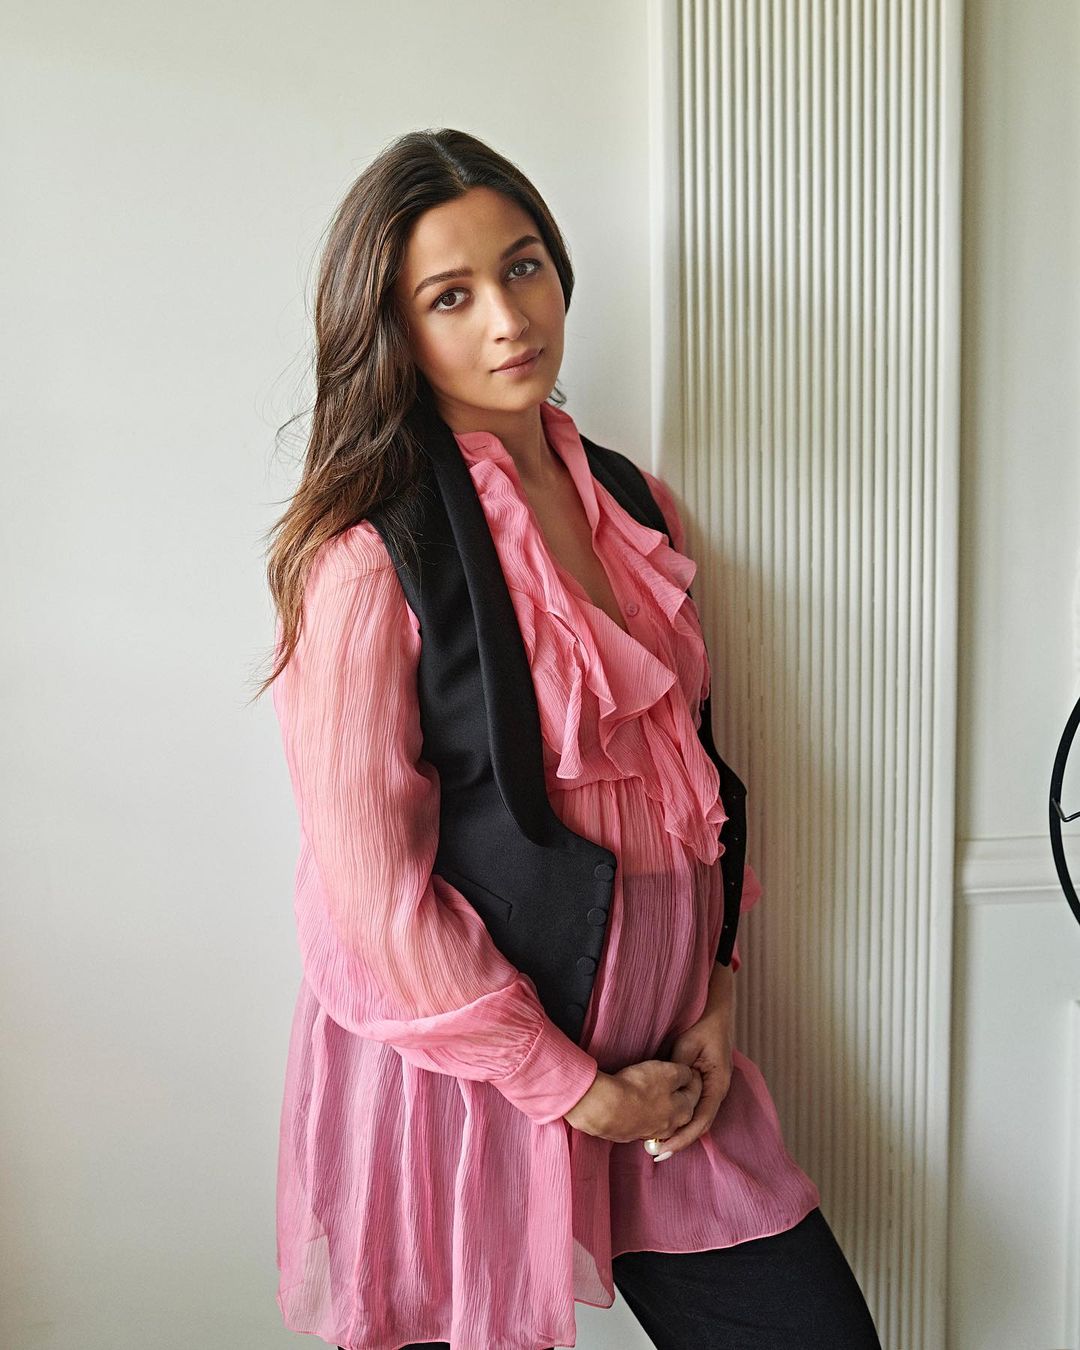 Alia Bhatt Flaunts Baby Bump In Pink Ruffled Shirt, Check Out The Diva's Most Stunning Pregnancy Looks So Far